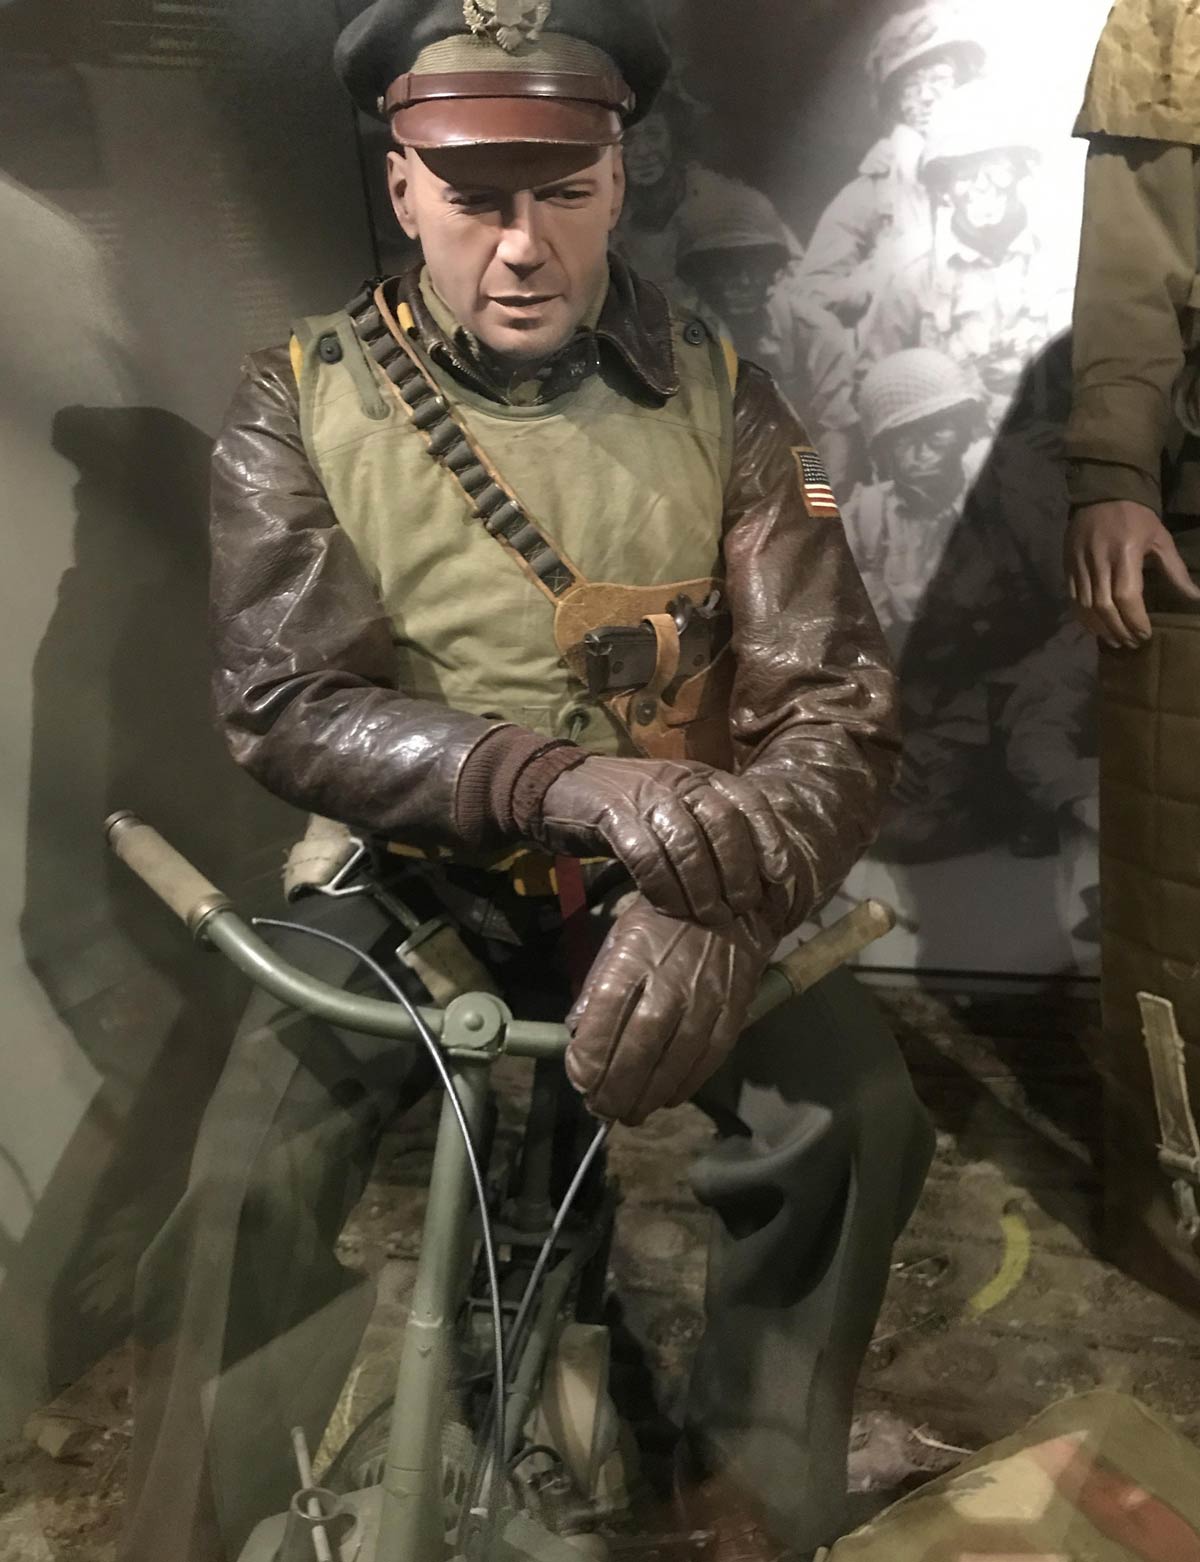 This mannequin from a WW2 themed museum in Normandy looks like Bruce Willis